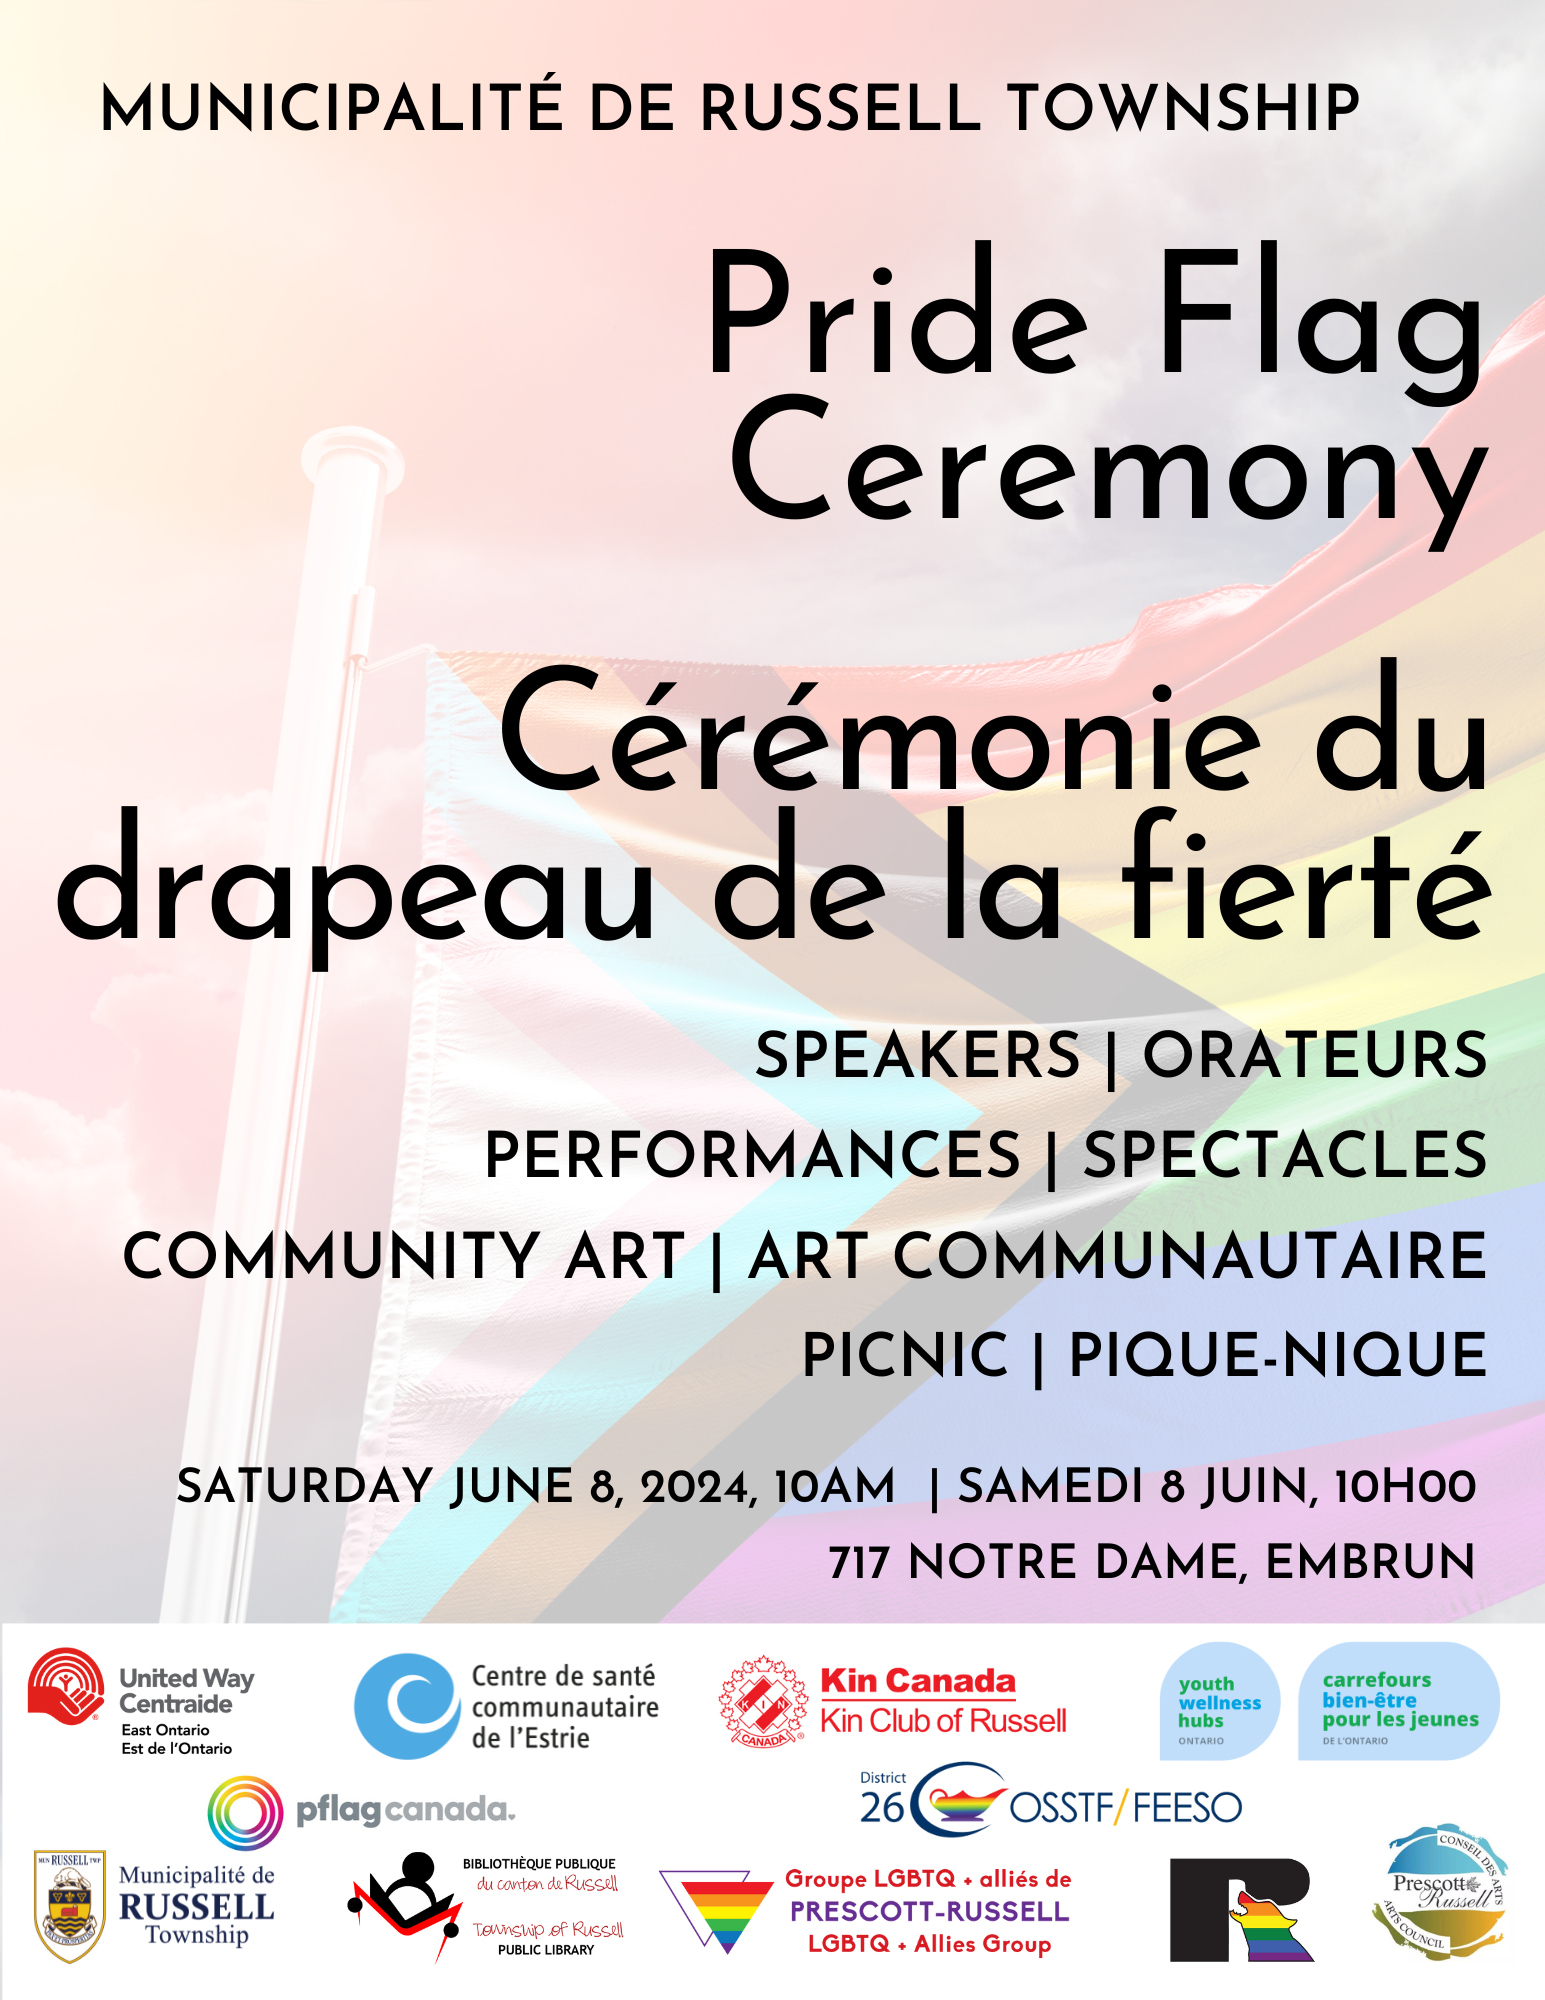 Poster for the Pride Flag Ceremony